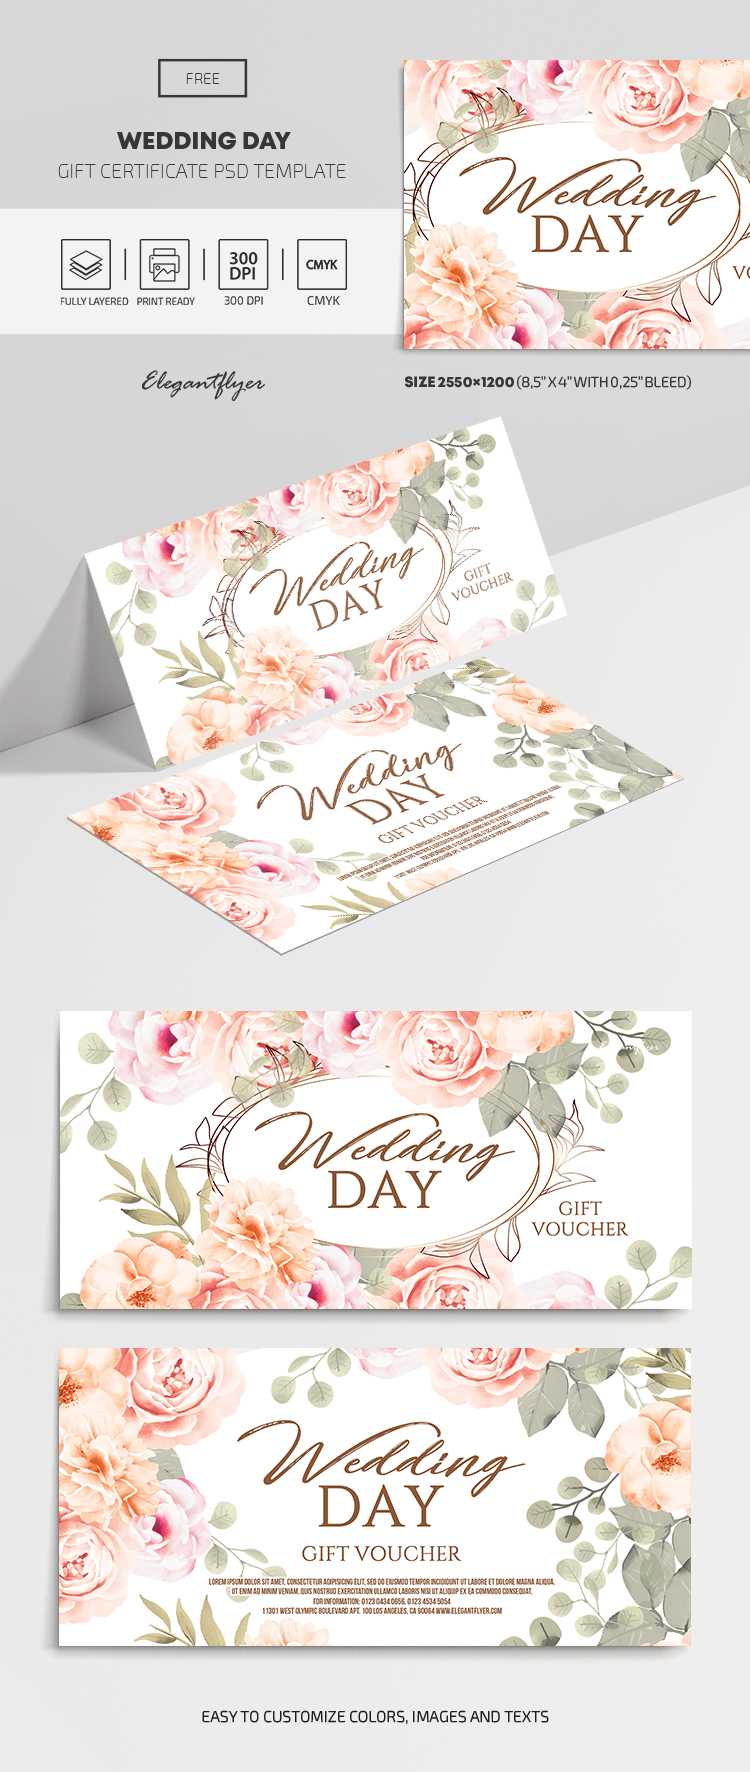 Wedding Day – Free Gift Certificate Template In Psd – Inside Spa Day Gift Certificate Template